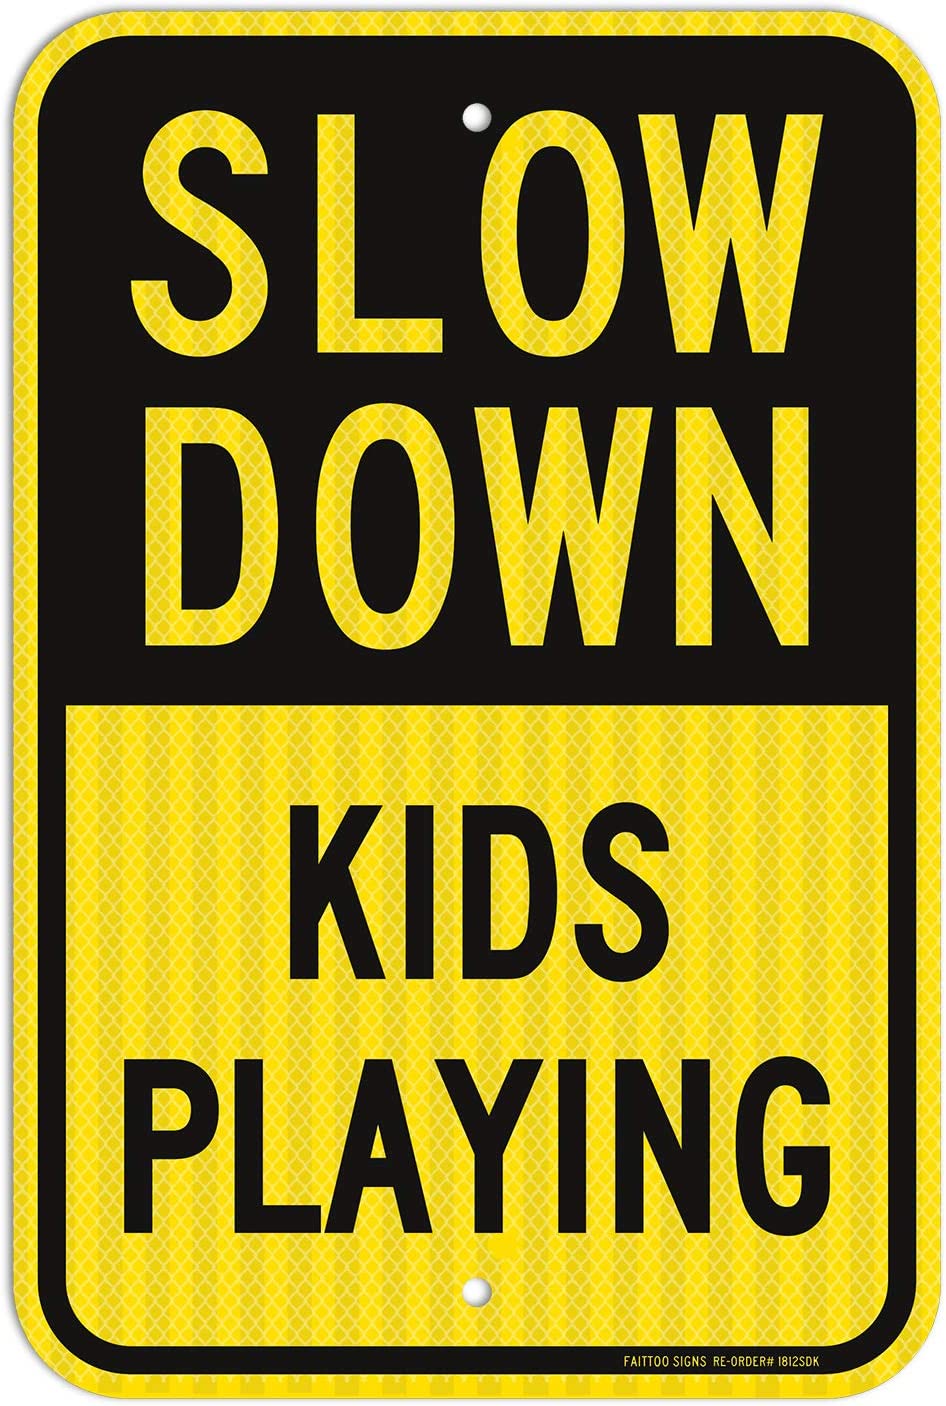 Slow Down Kids Playing Signs, Slow Down Children Playing Sign, 18 x 12 Engineer Grade Reflective Sheeting Rust Free Aluminum, Weather Resistant, Waterproof, Durable Ink, Easy To Mount